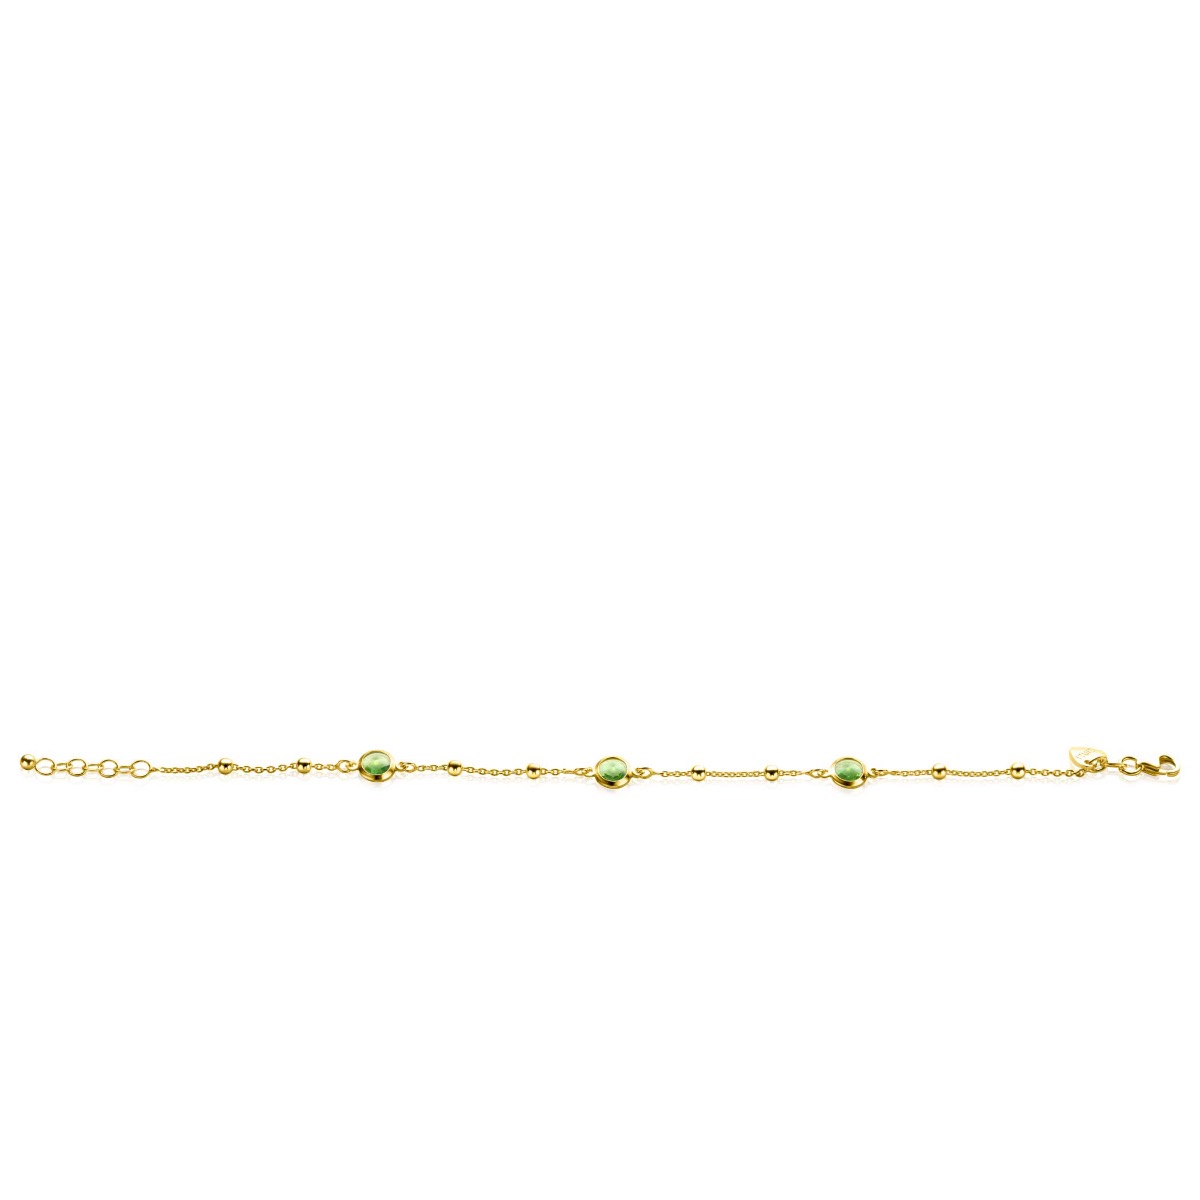 ZINZI Gold Plated Sterling Silver Bracelet with Beads and Round Green Swarovski Crystals 17-20cm ZIA2348